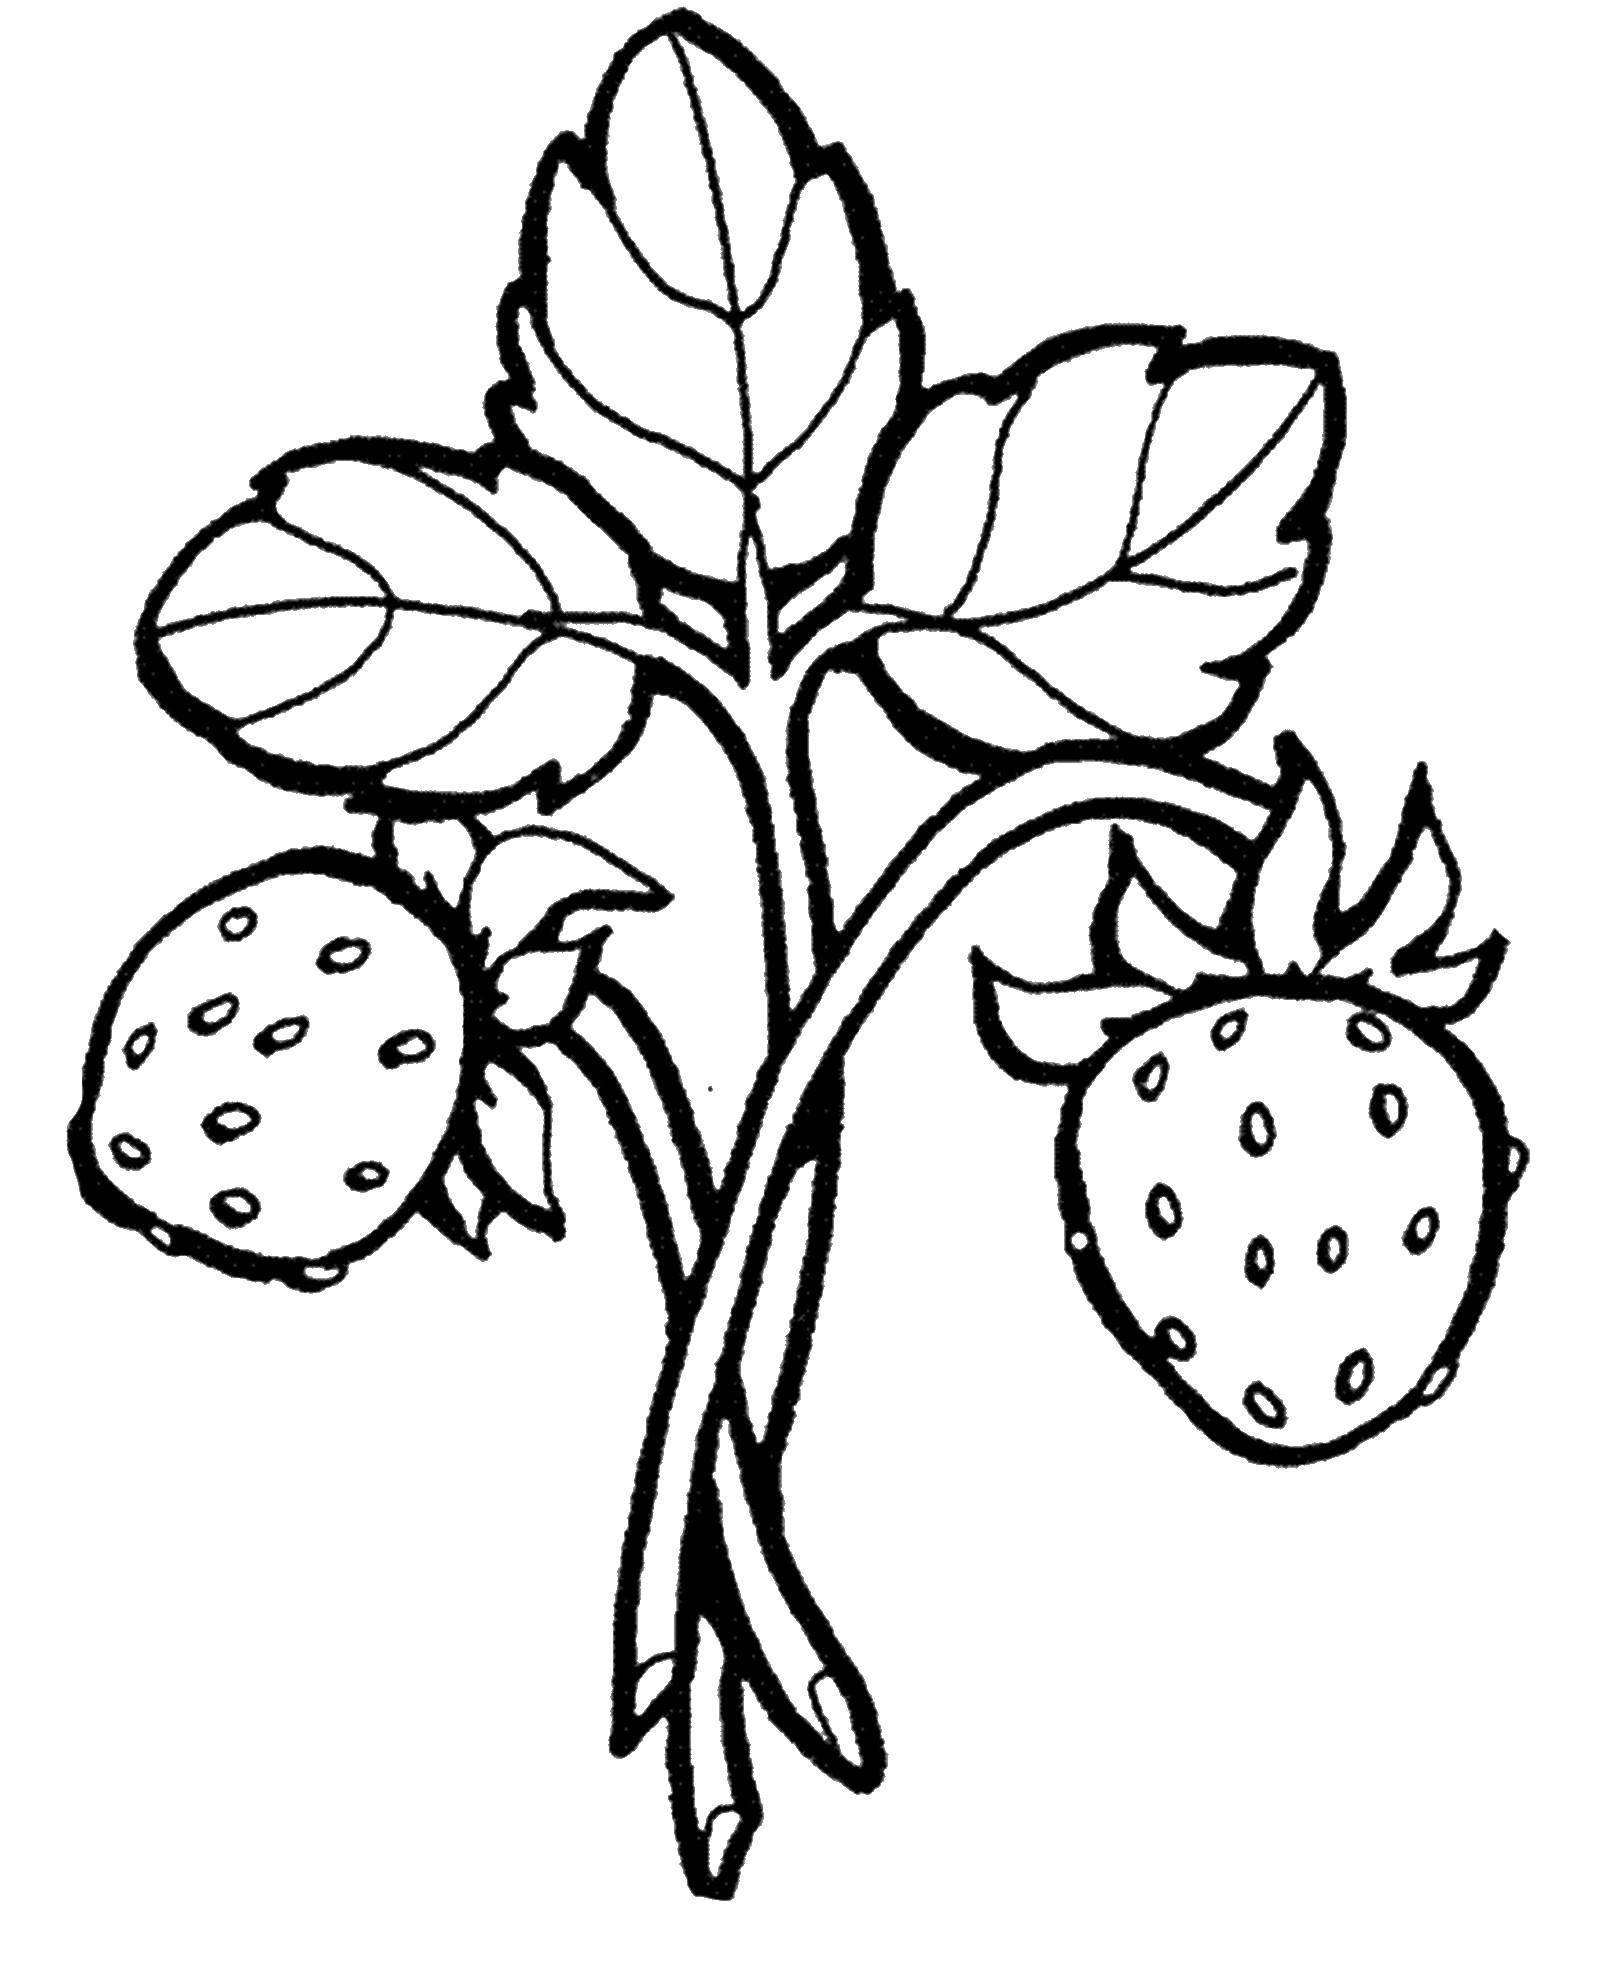 Coloring Strawberry. Category berries. Tags:  Berries, strawberries.